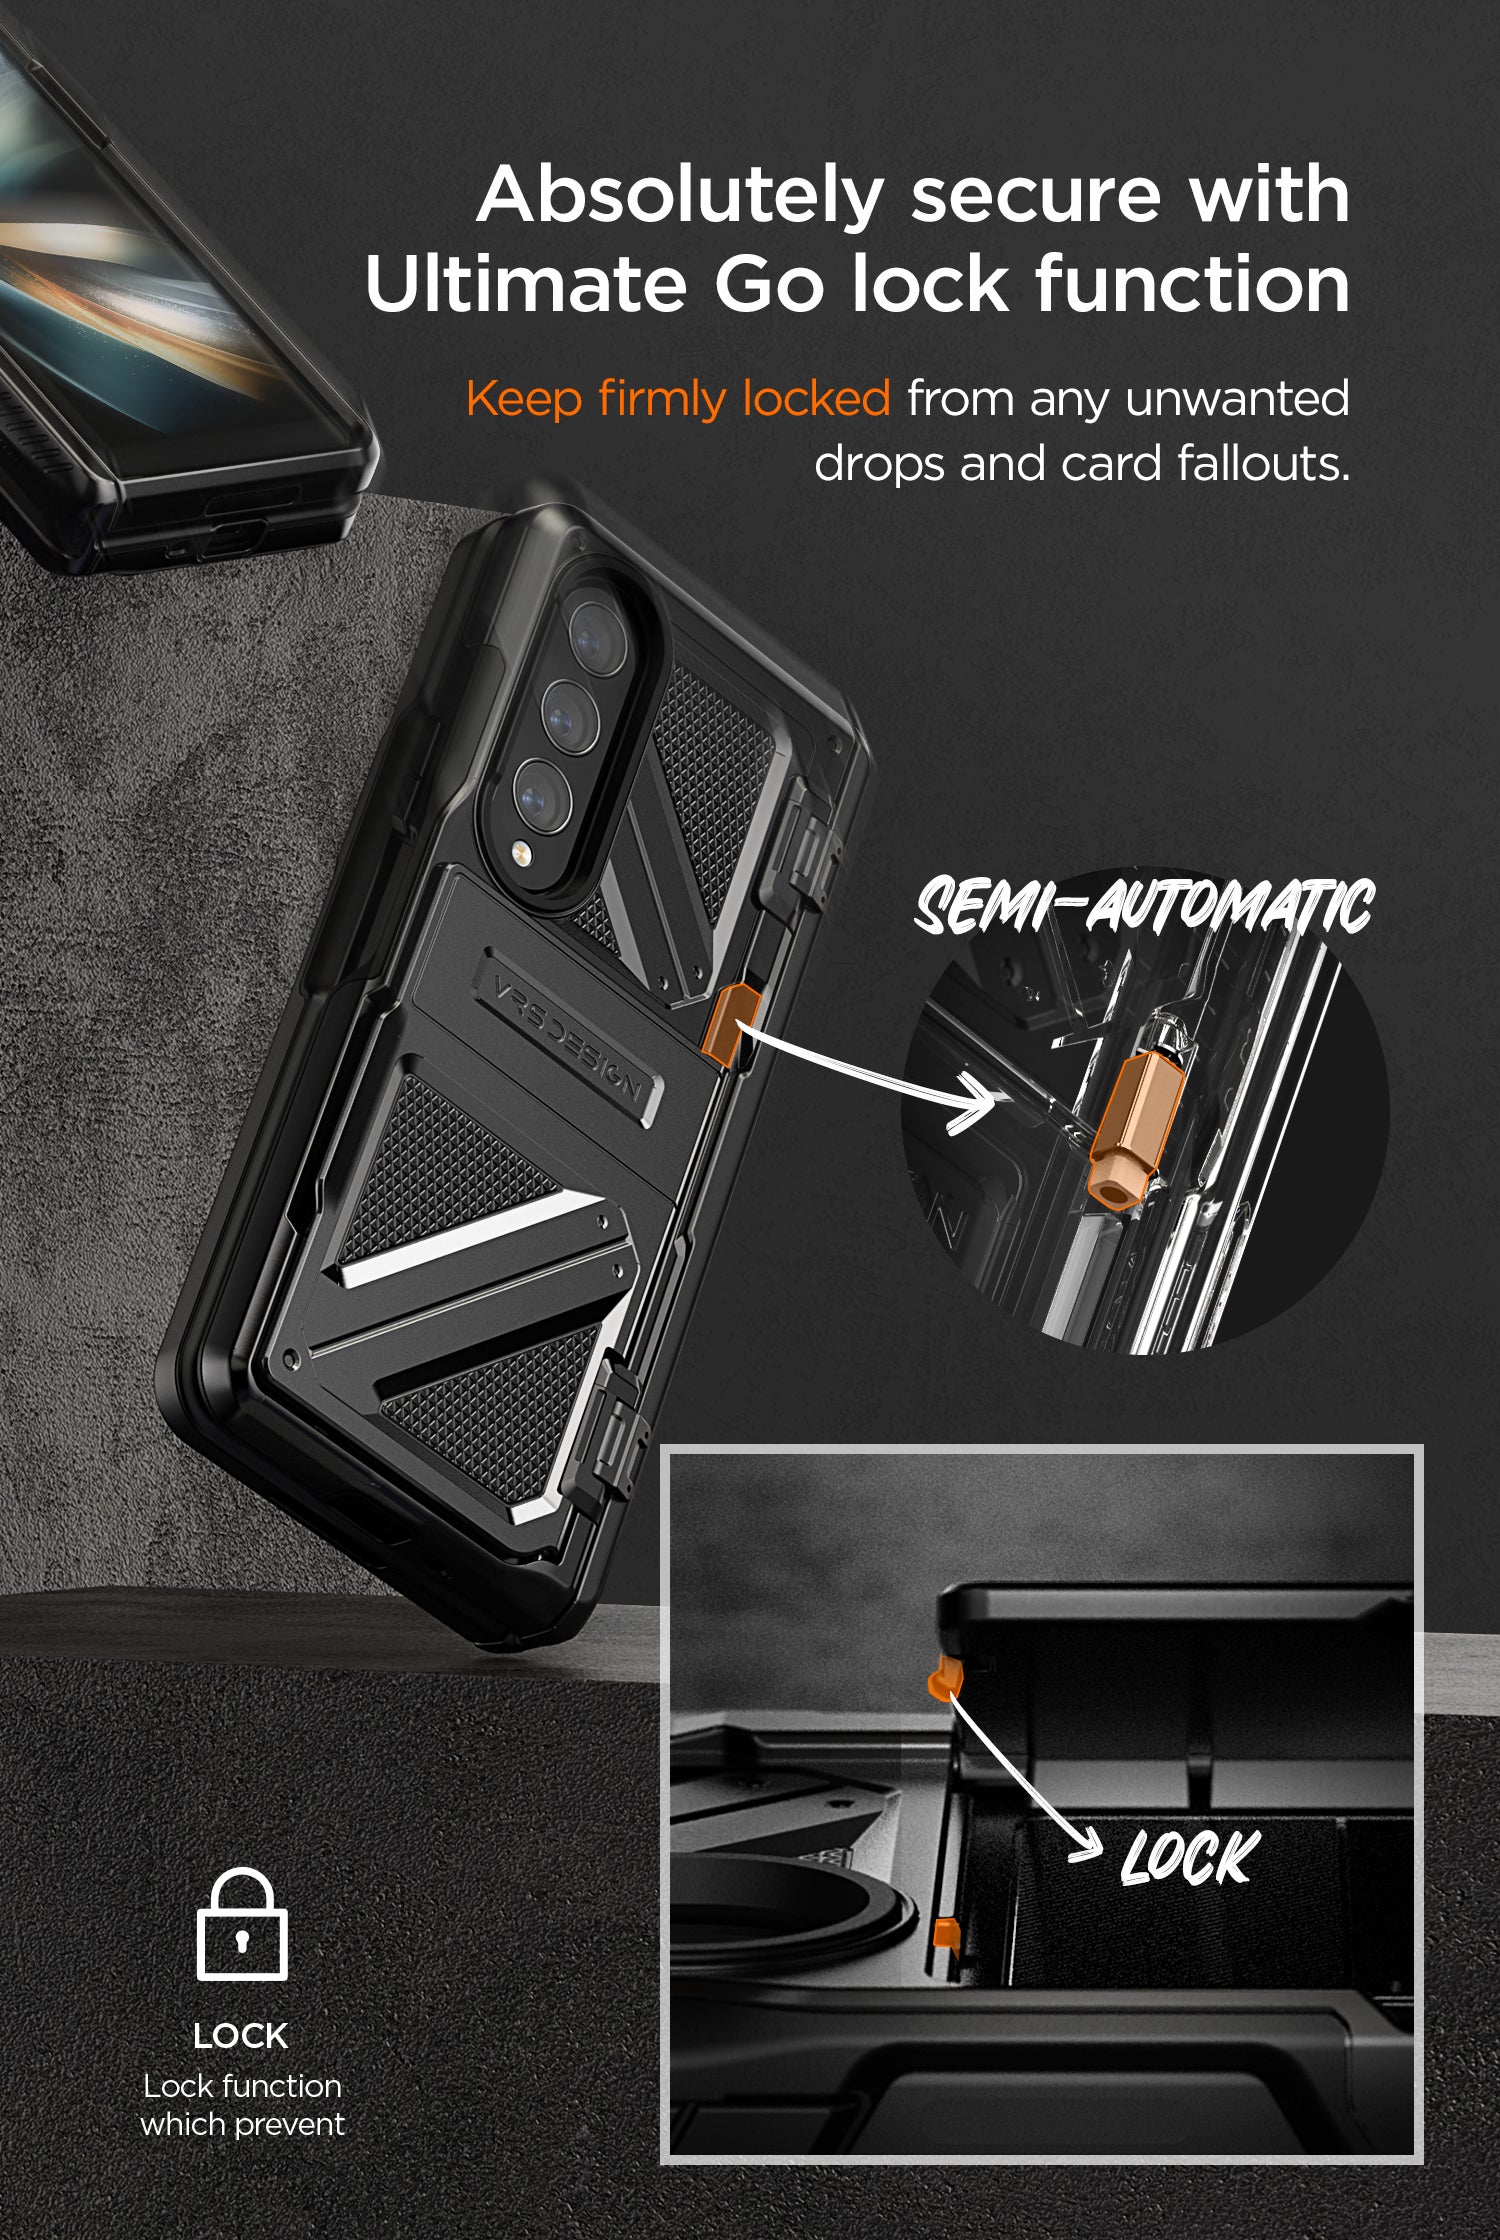 Samsung Galaxy Z Fold 4 wallet rugged case with multiple durable and convenient card slot with sleek minimalism by VRS